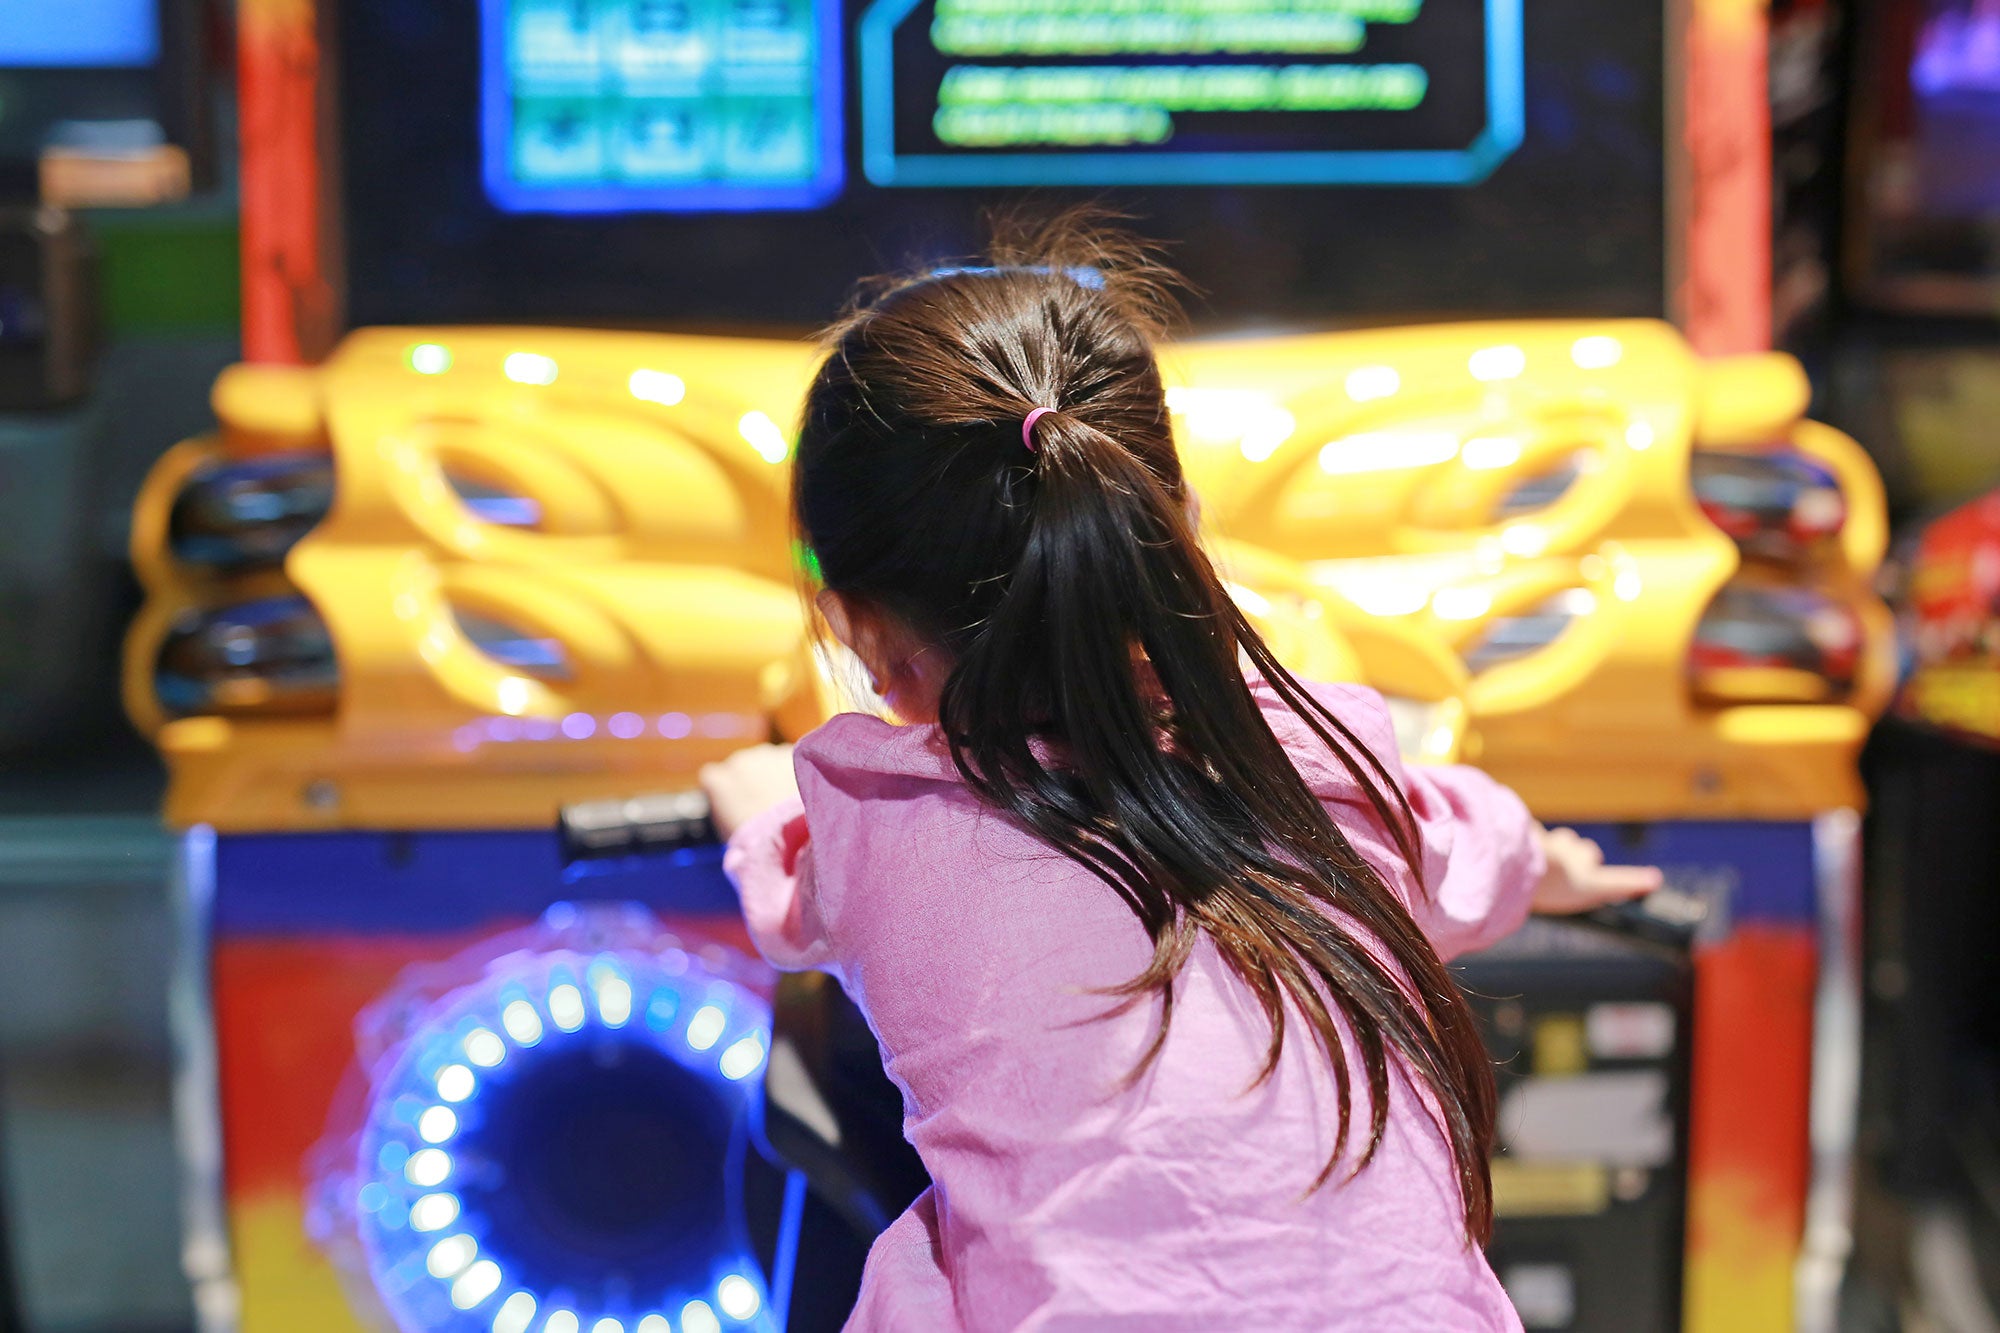 A ponytailed child in a pink sweatshirt faces an arcade game.